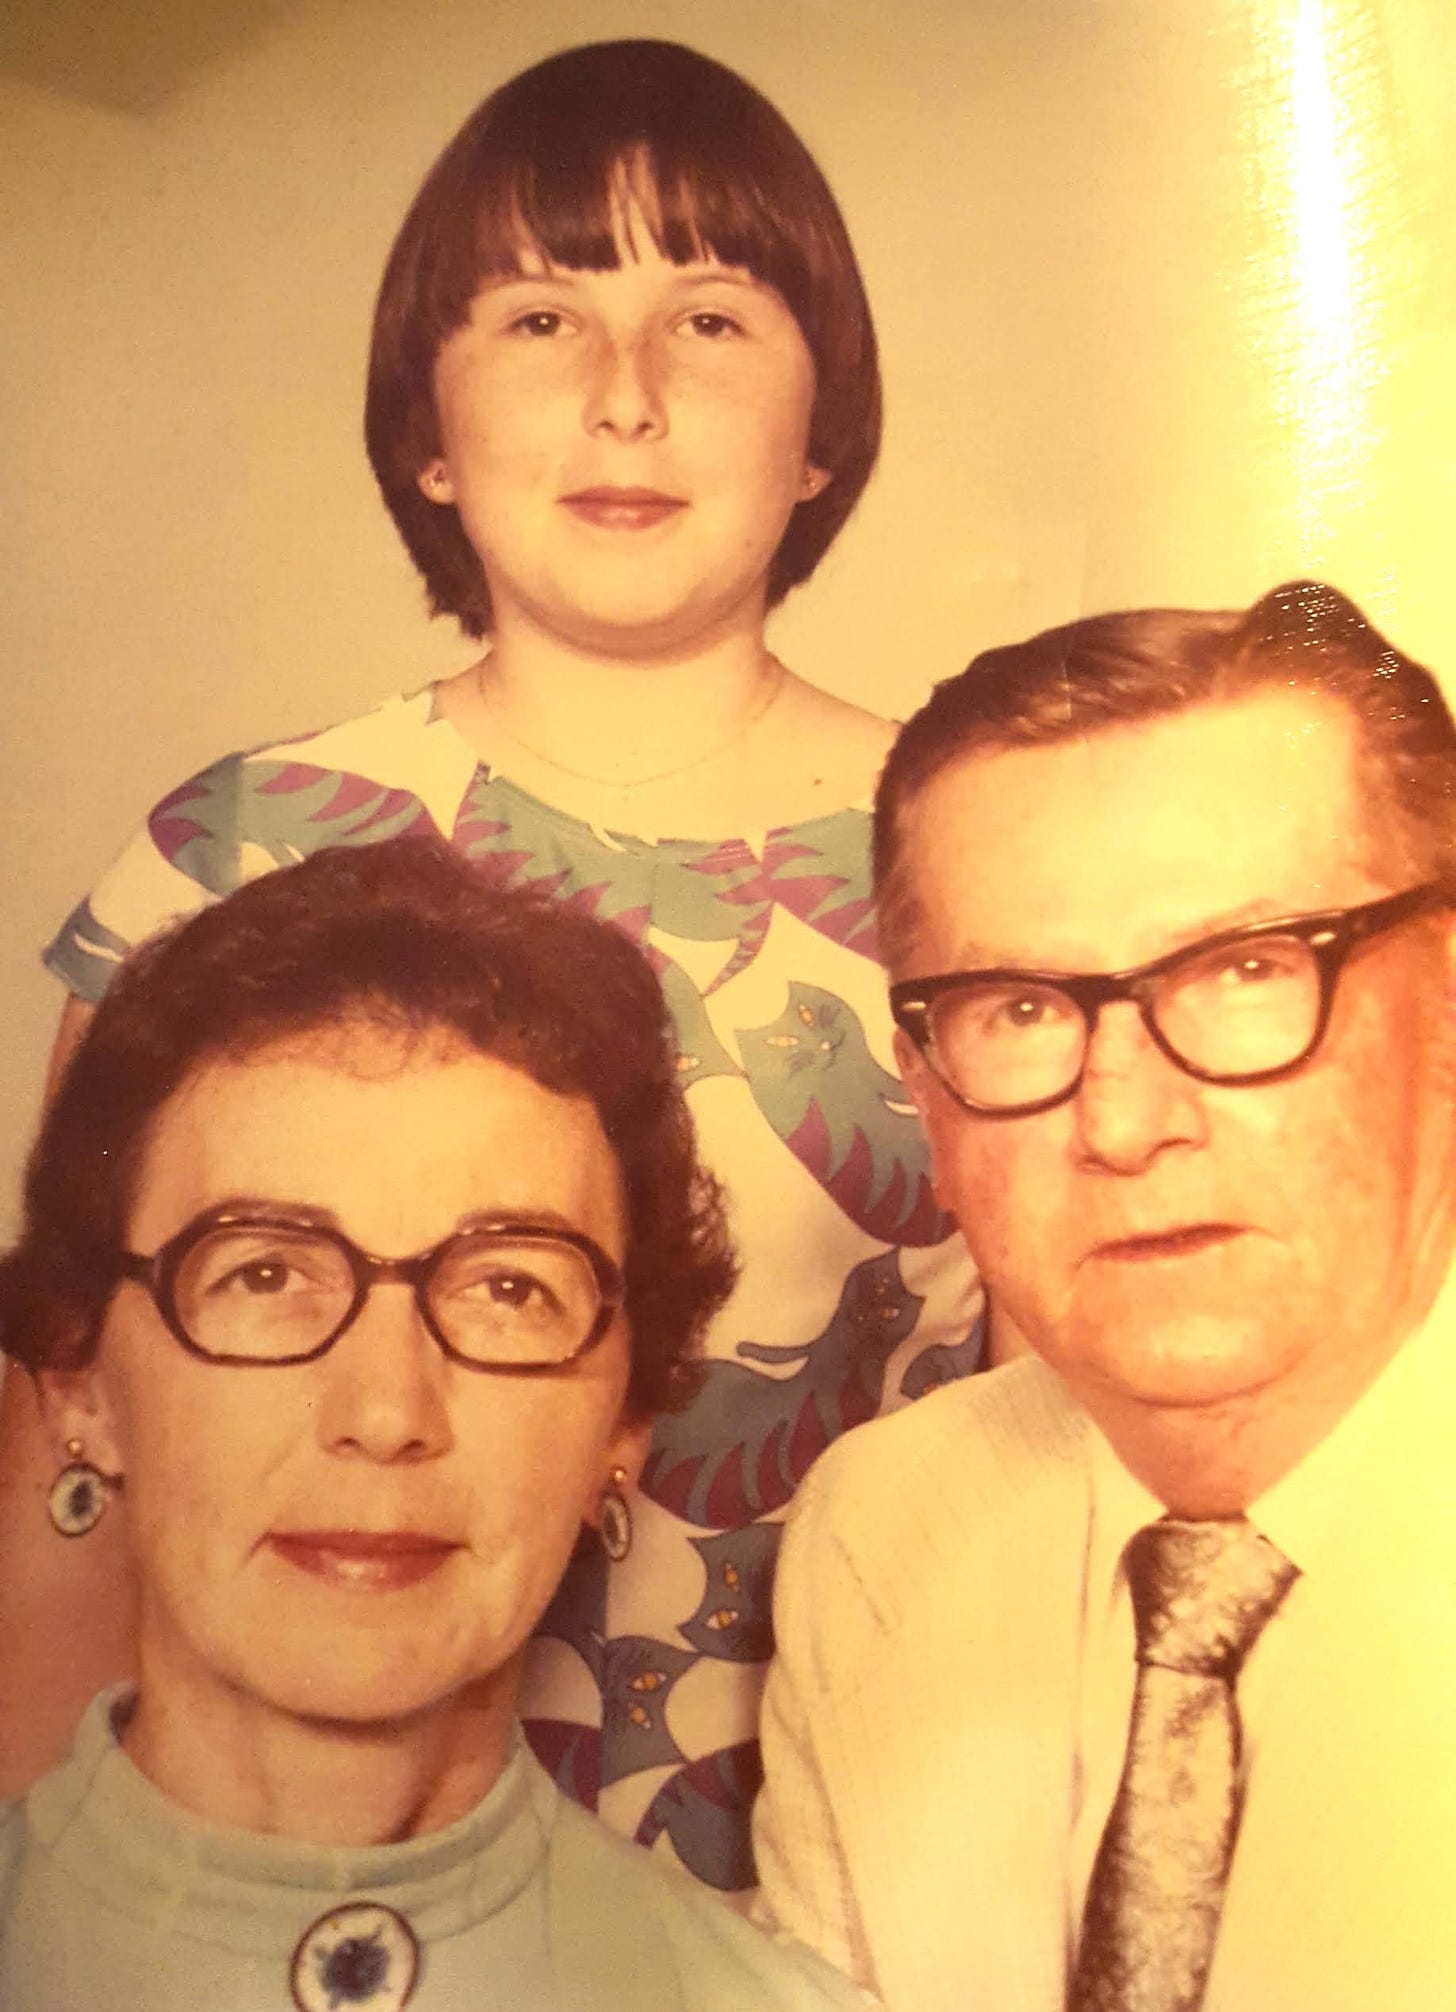 Seventies era family photo. Seated at left: dark haired woman with dark glasses, smiling slightly. To her left, gray haired man with dark glasses, attentive expression. Standing over them on a platform: smiling girl wearing a dress with a purple and blue tabby cat motif.